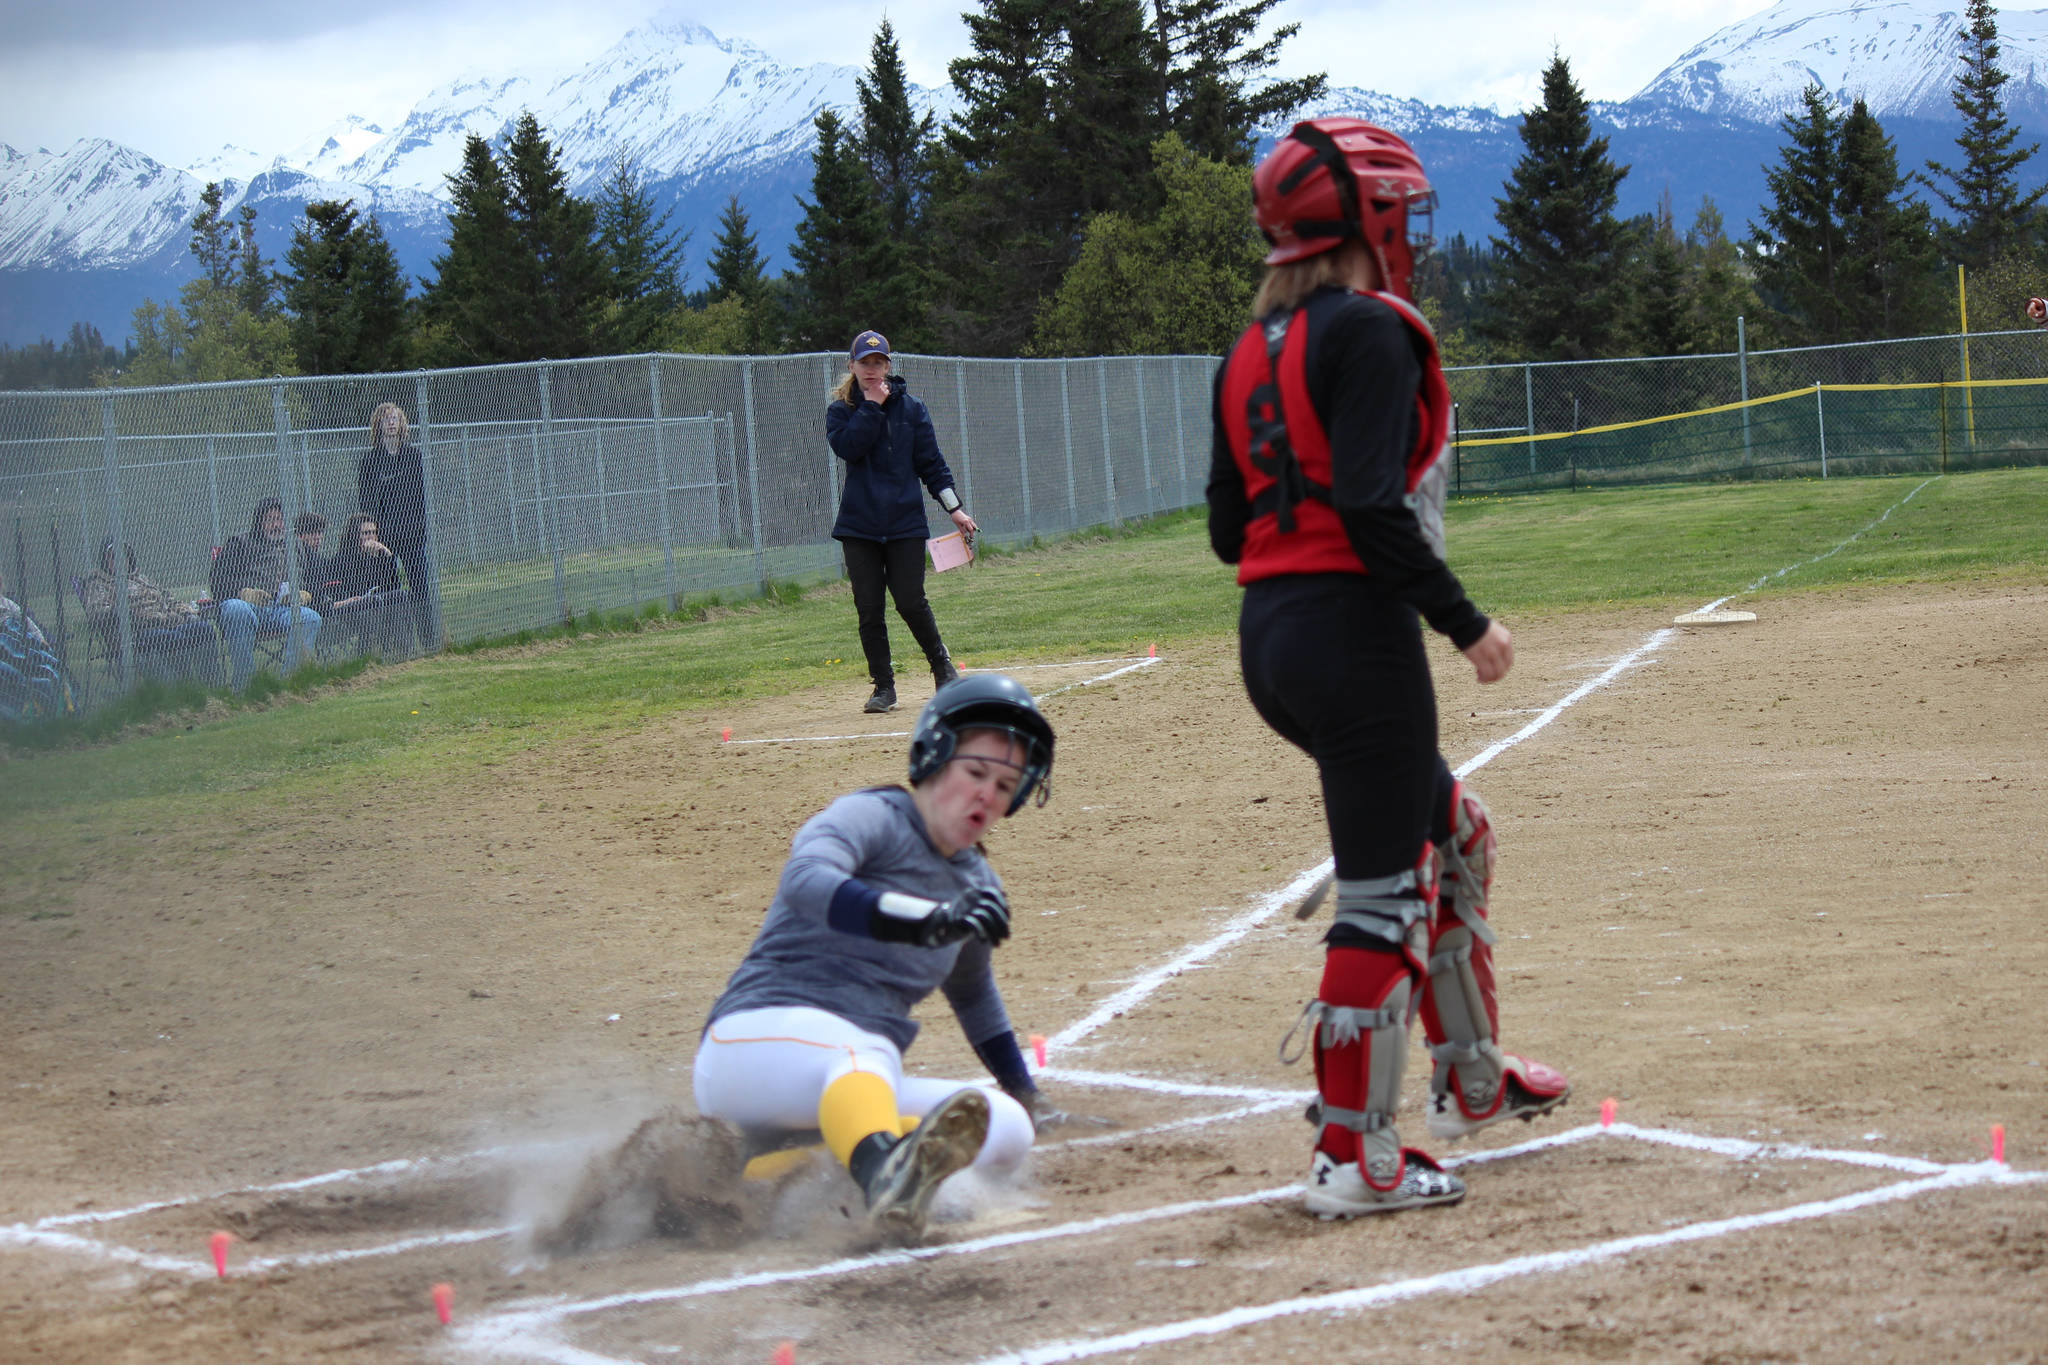 Mariner Grace Godfrey slides across home plate during Saturday’s game against the Kenai Central Kardinals. Godfrey scored three runs during the game, one in the first inning and two in the second. (Photo by McKibben Jackinsky)